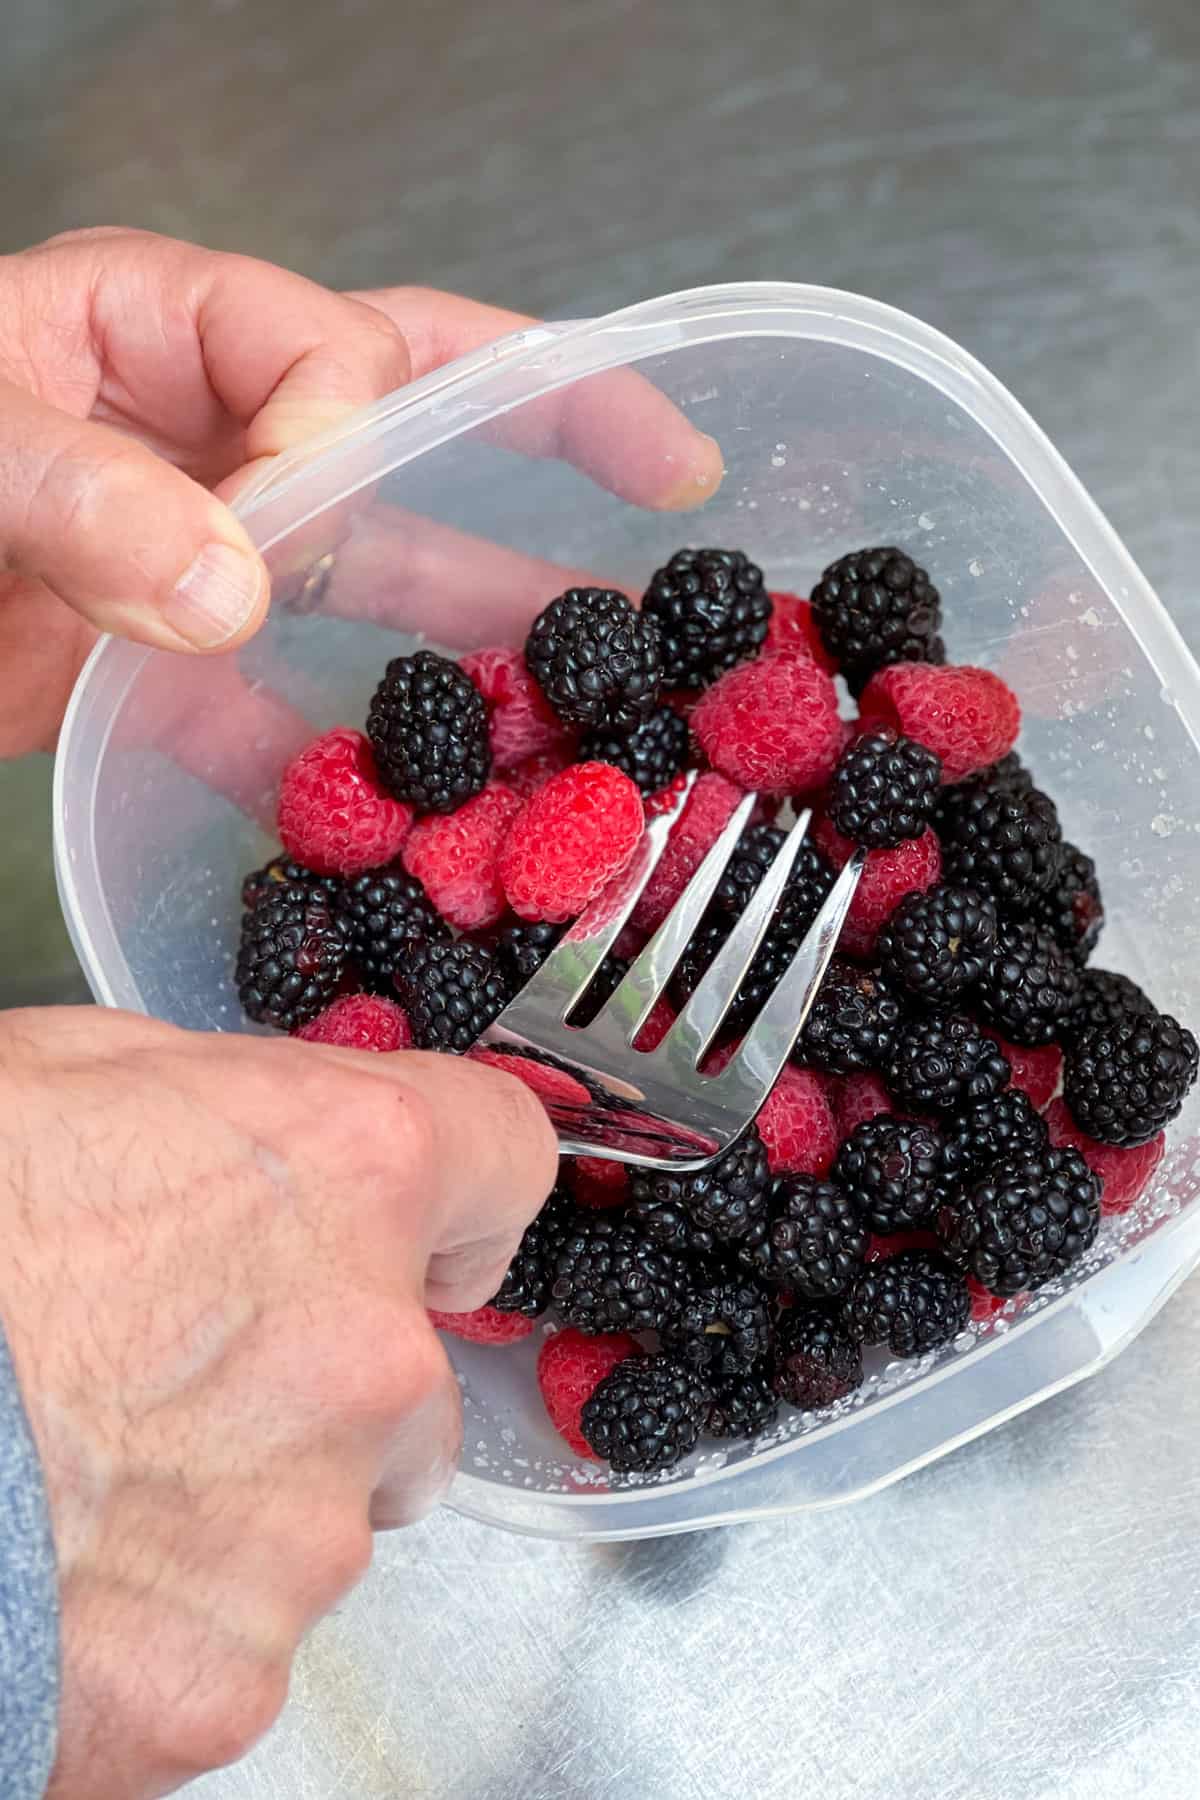 a large fork pressing down on fresh blackberries and raspberries that are in a plastic container